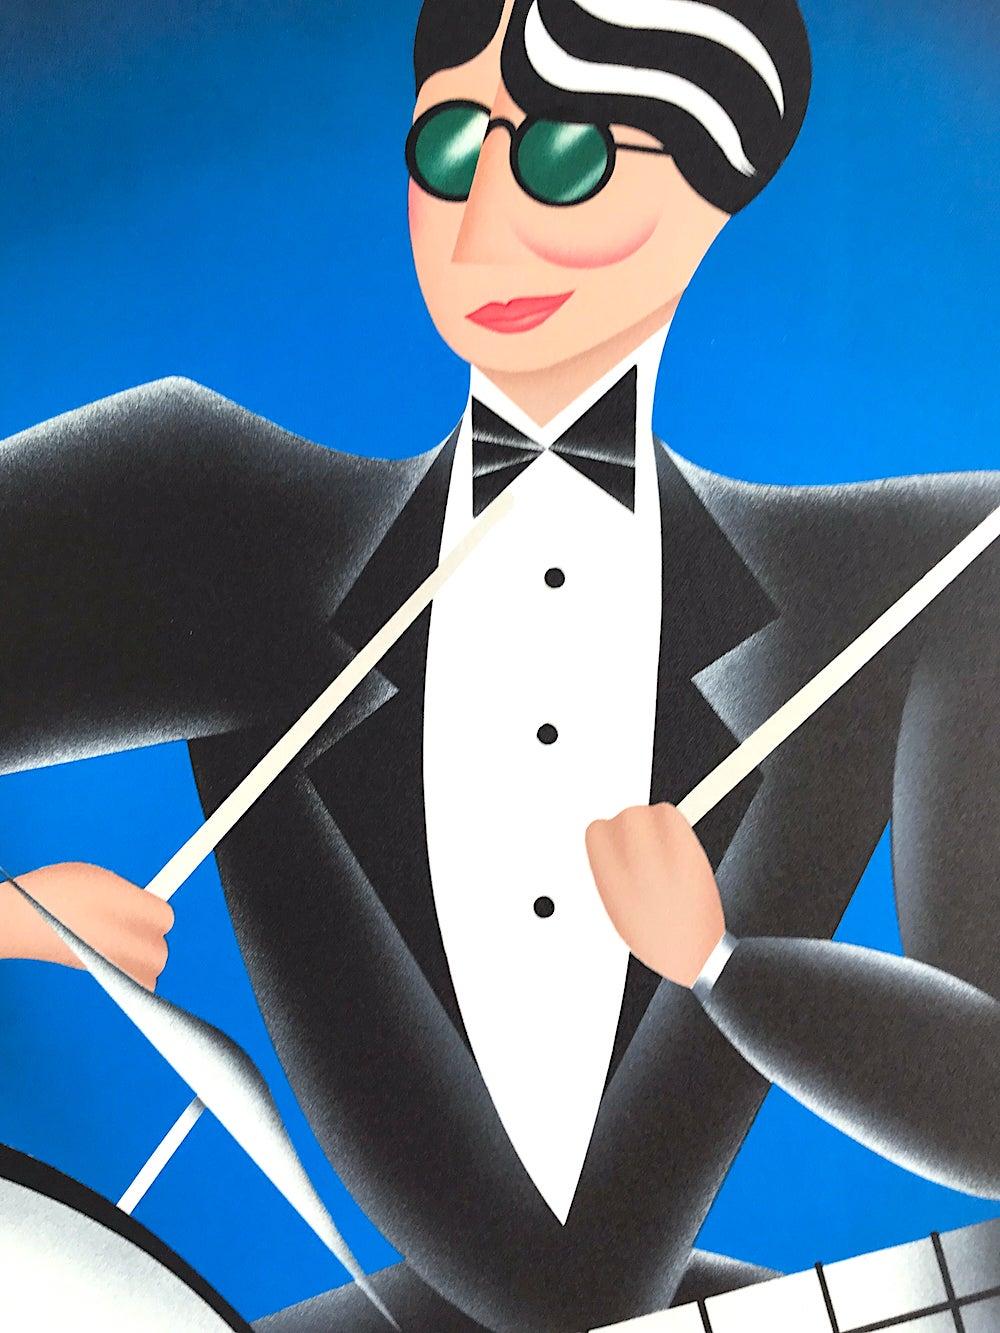 COOL BLUE Signed Lithograph, Modern Art Deco Portrait, Drums Jazz Music - Print by Robin Morris